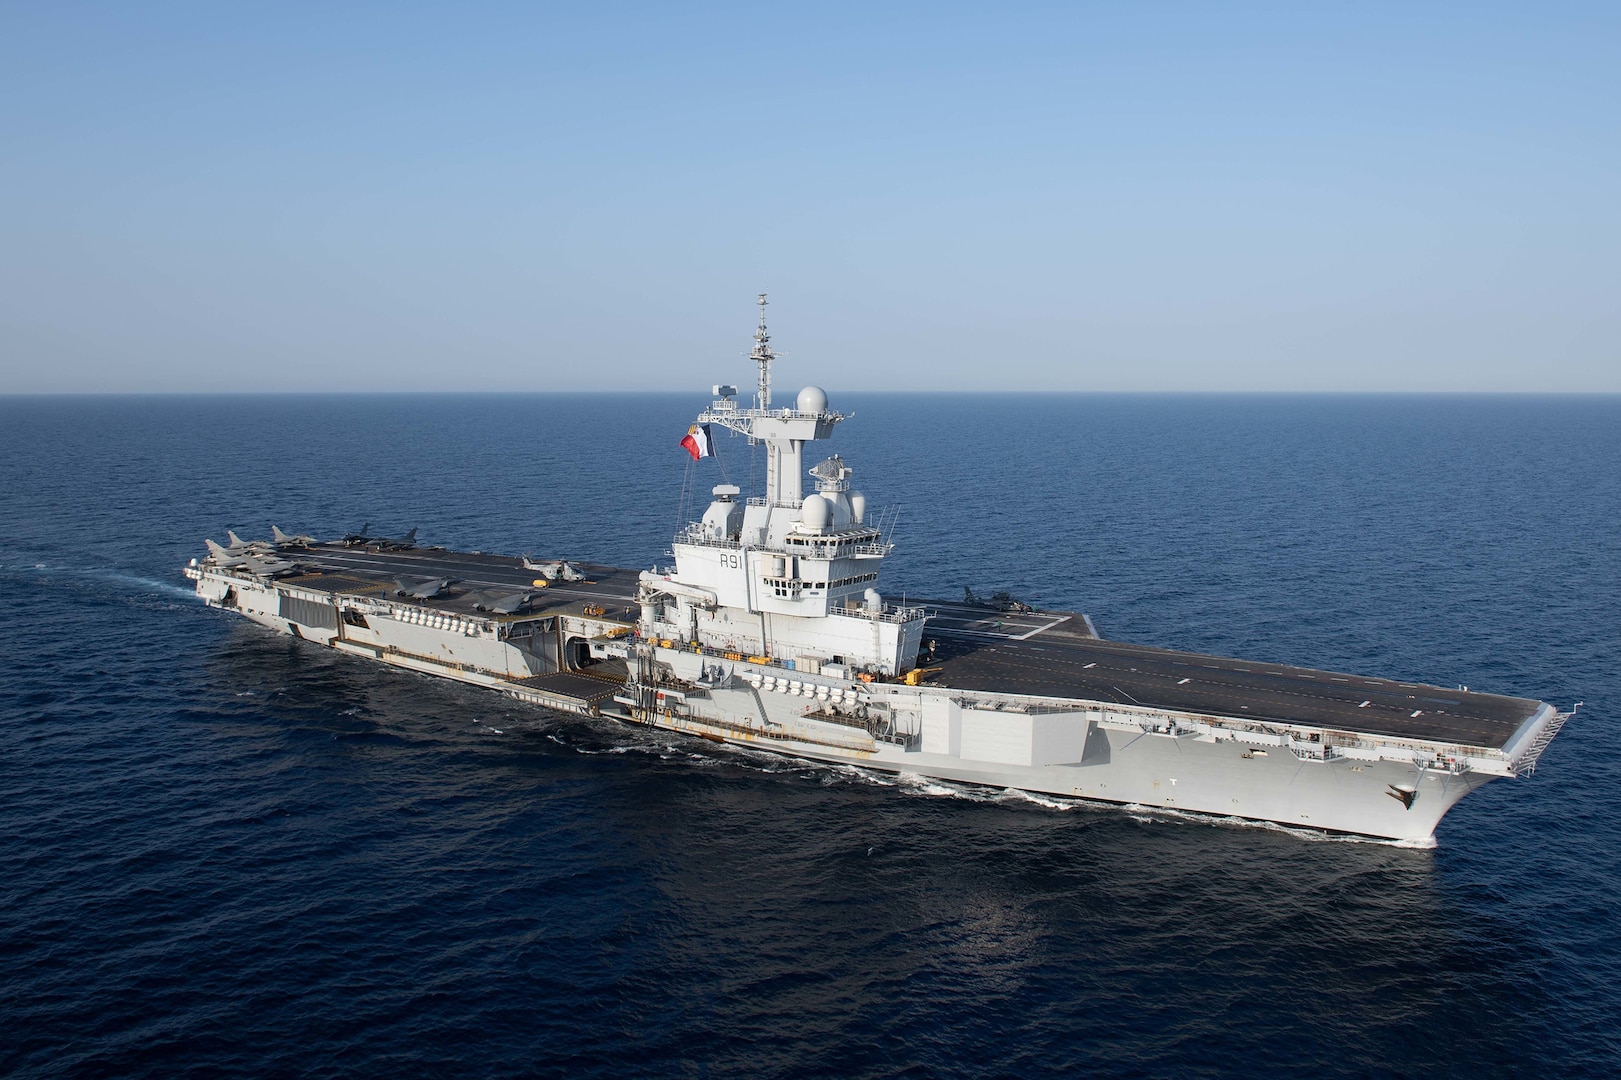 U.S., Allied Forces Begin La Perouse Exercises with French Aircraft Carrier in Gulf of Bengal